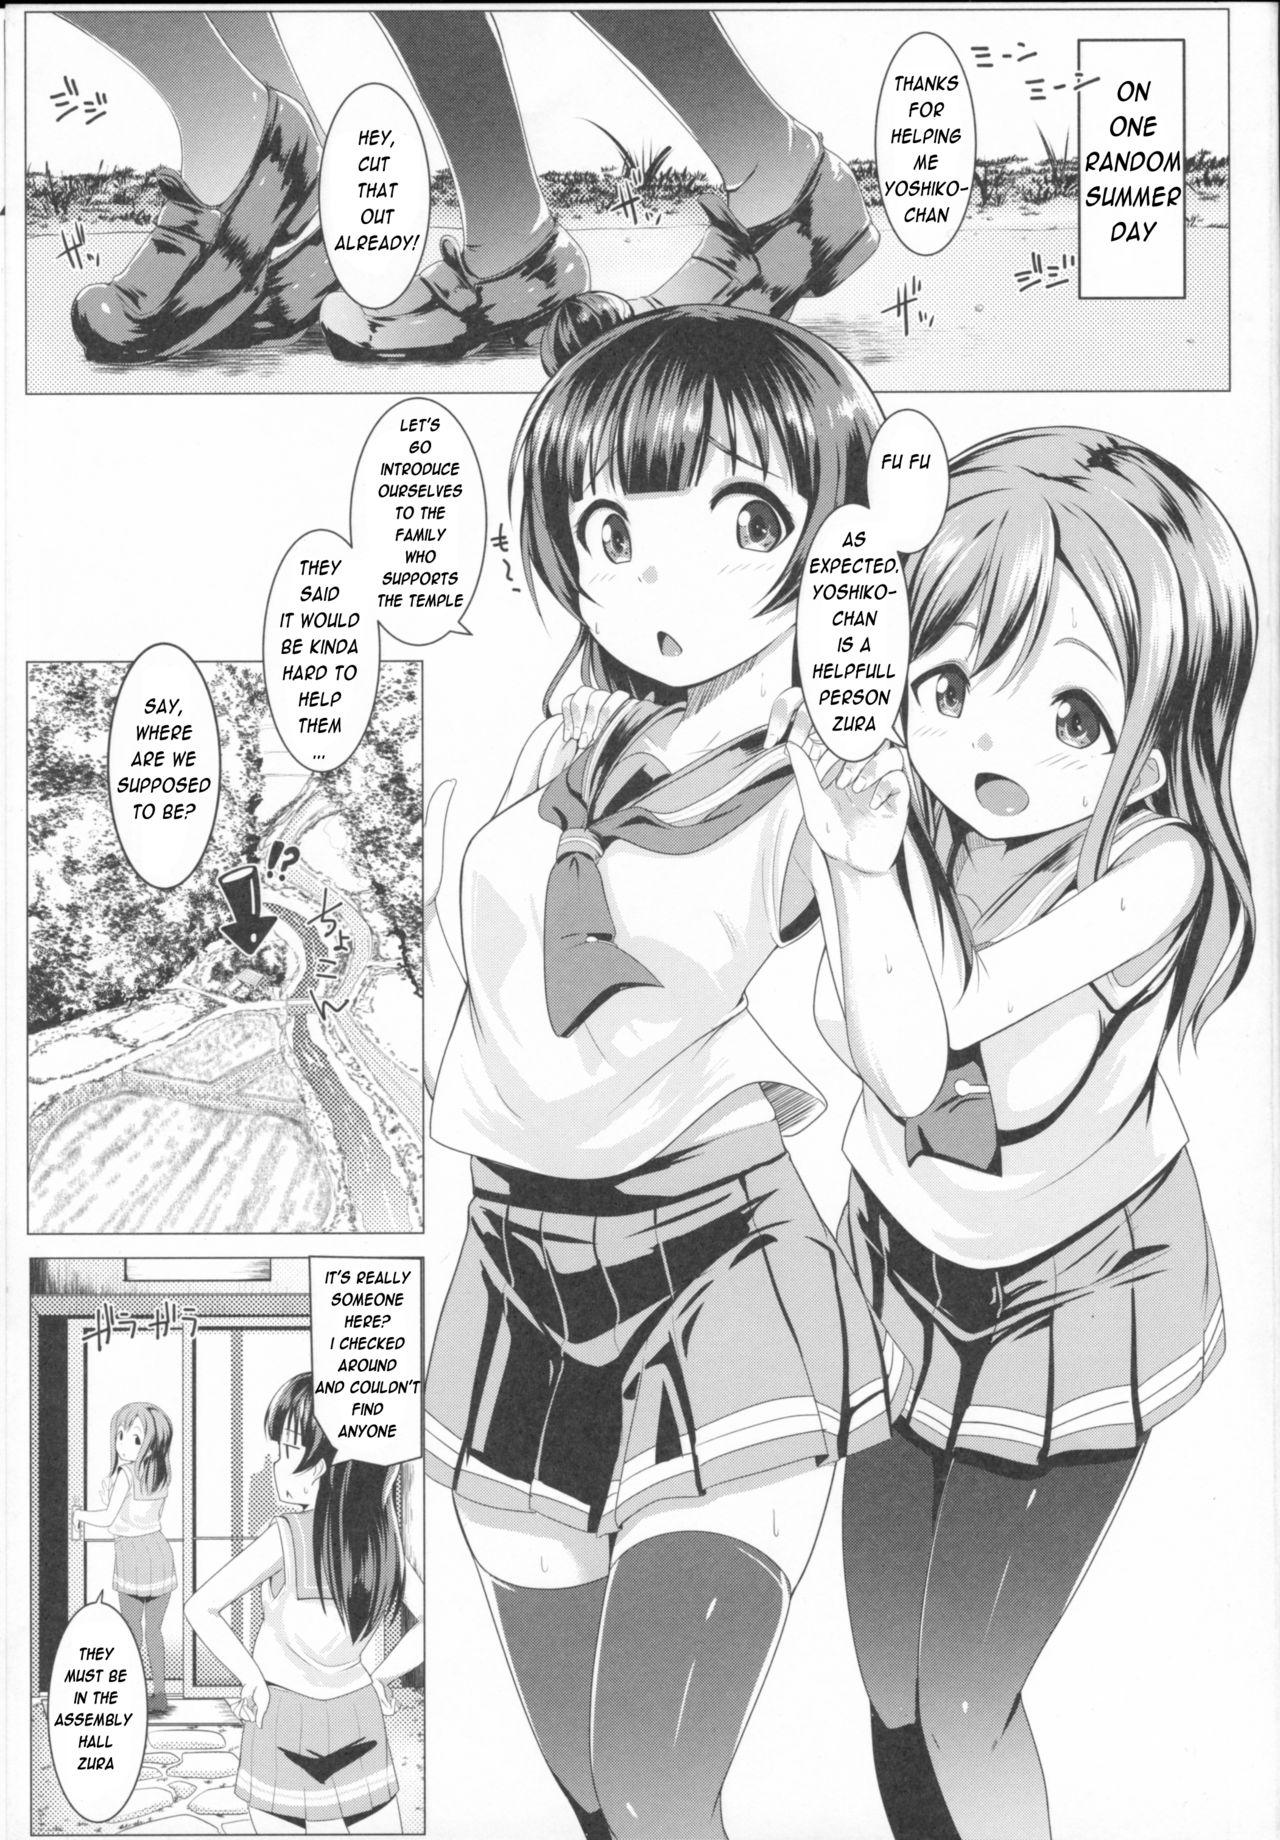 Bang Bros SUMMER PROMISCUITY with Yoshimaruby - Love live sunshine Gritona - Page 4